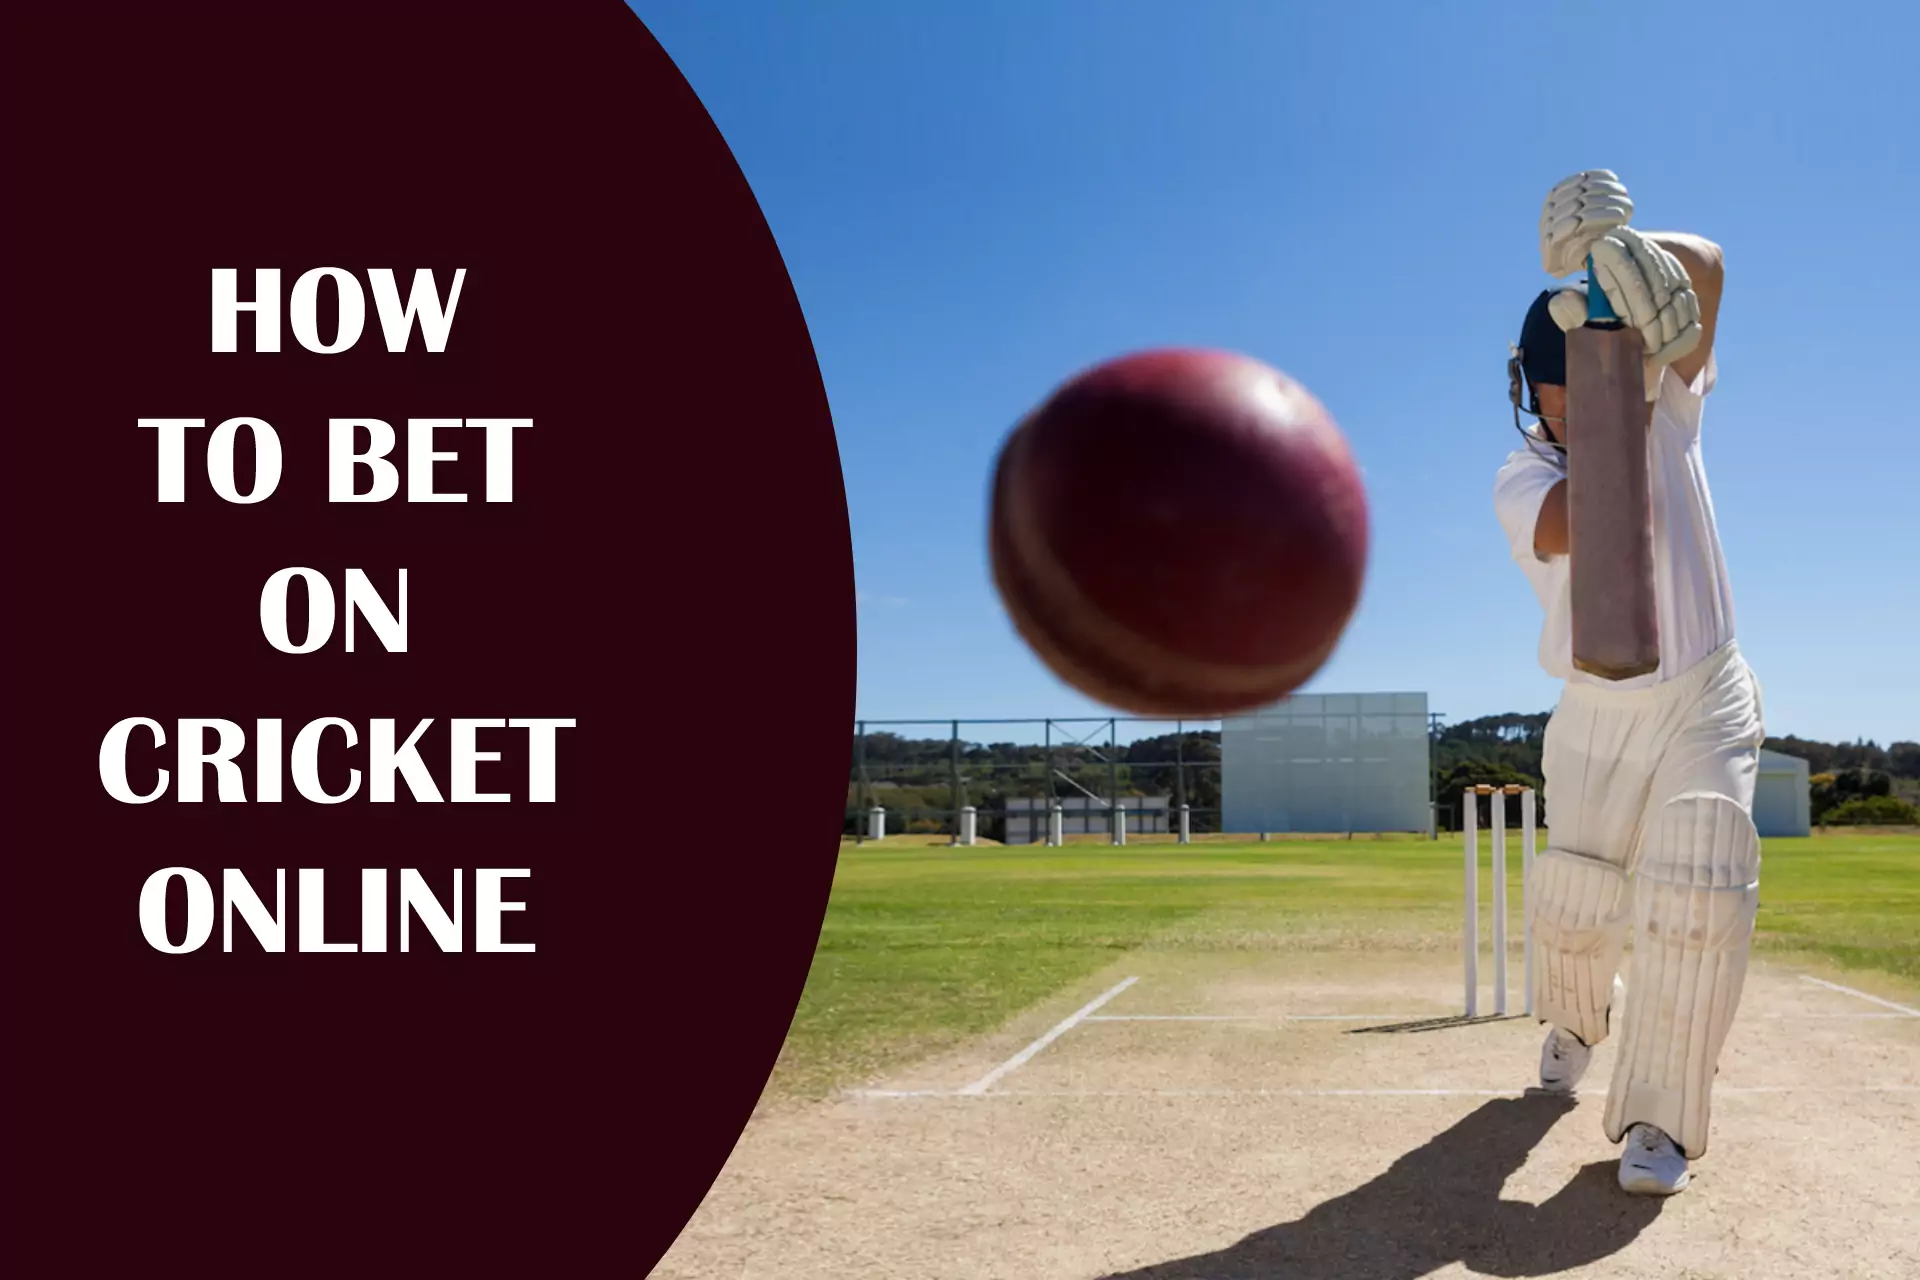 Learn how to correctly bet on cricket online.